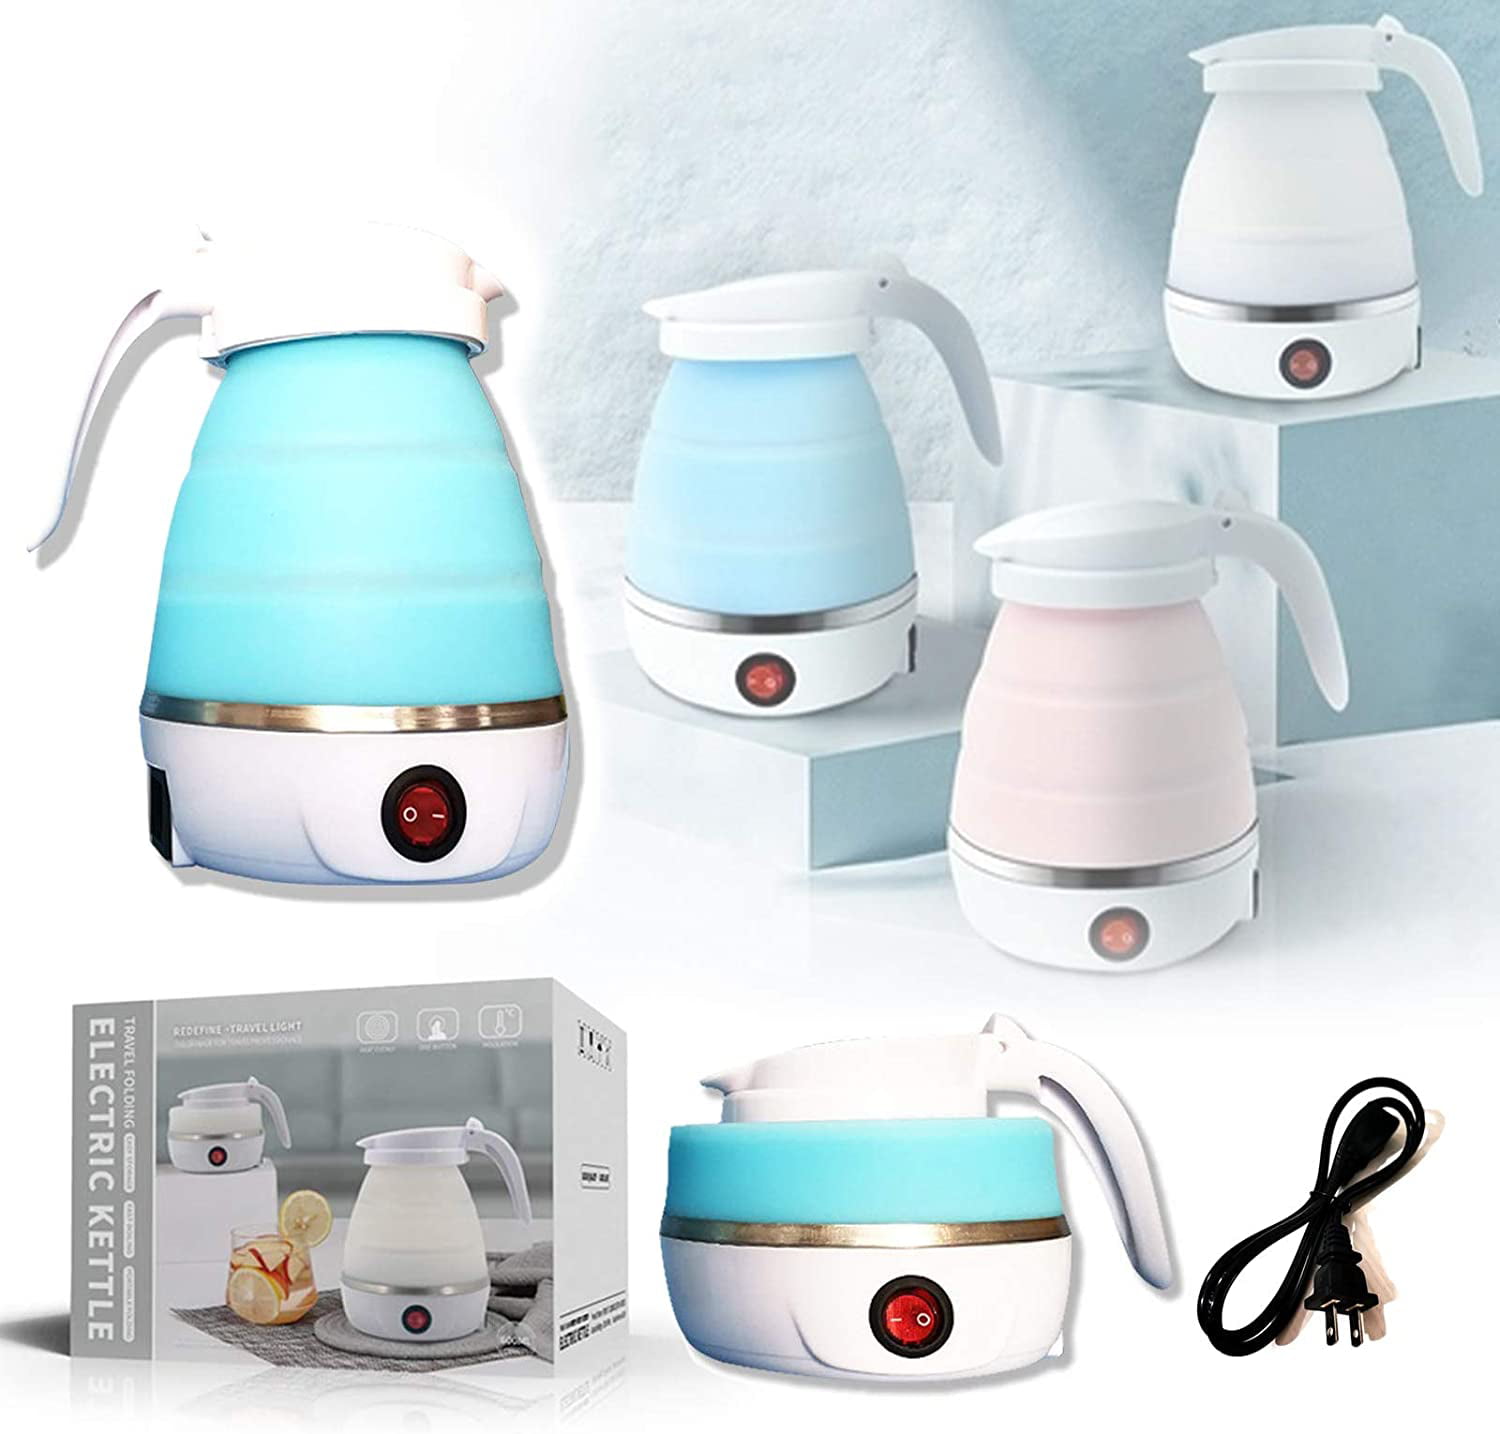 UpdateClassic,Portable Travel Foldable Electric Kettle Collapsible